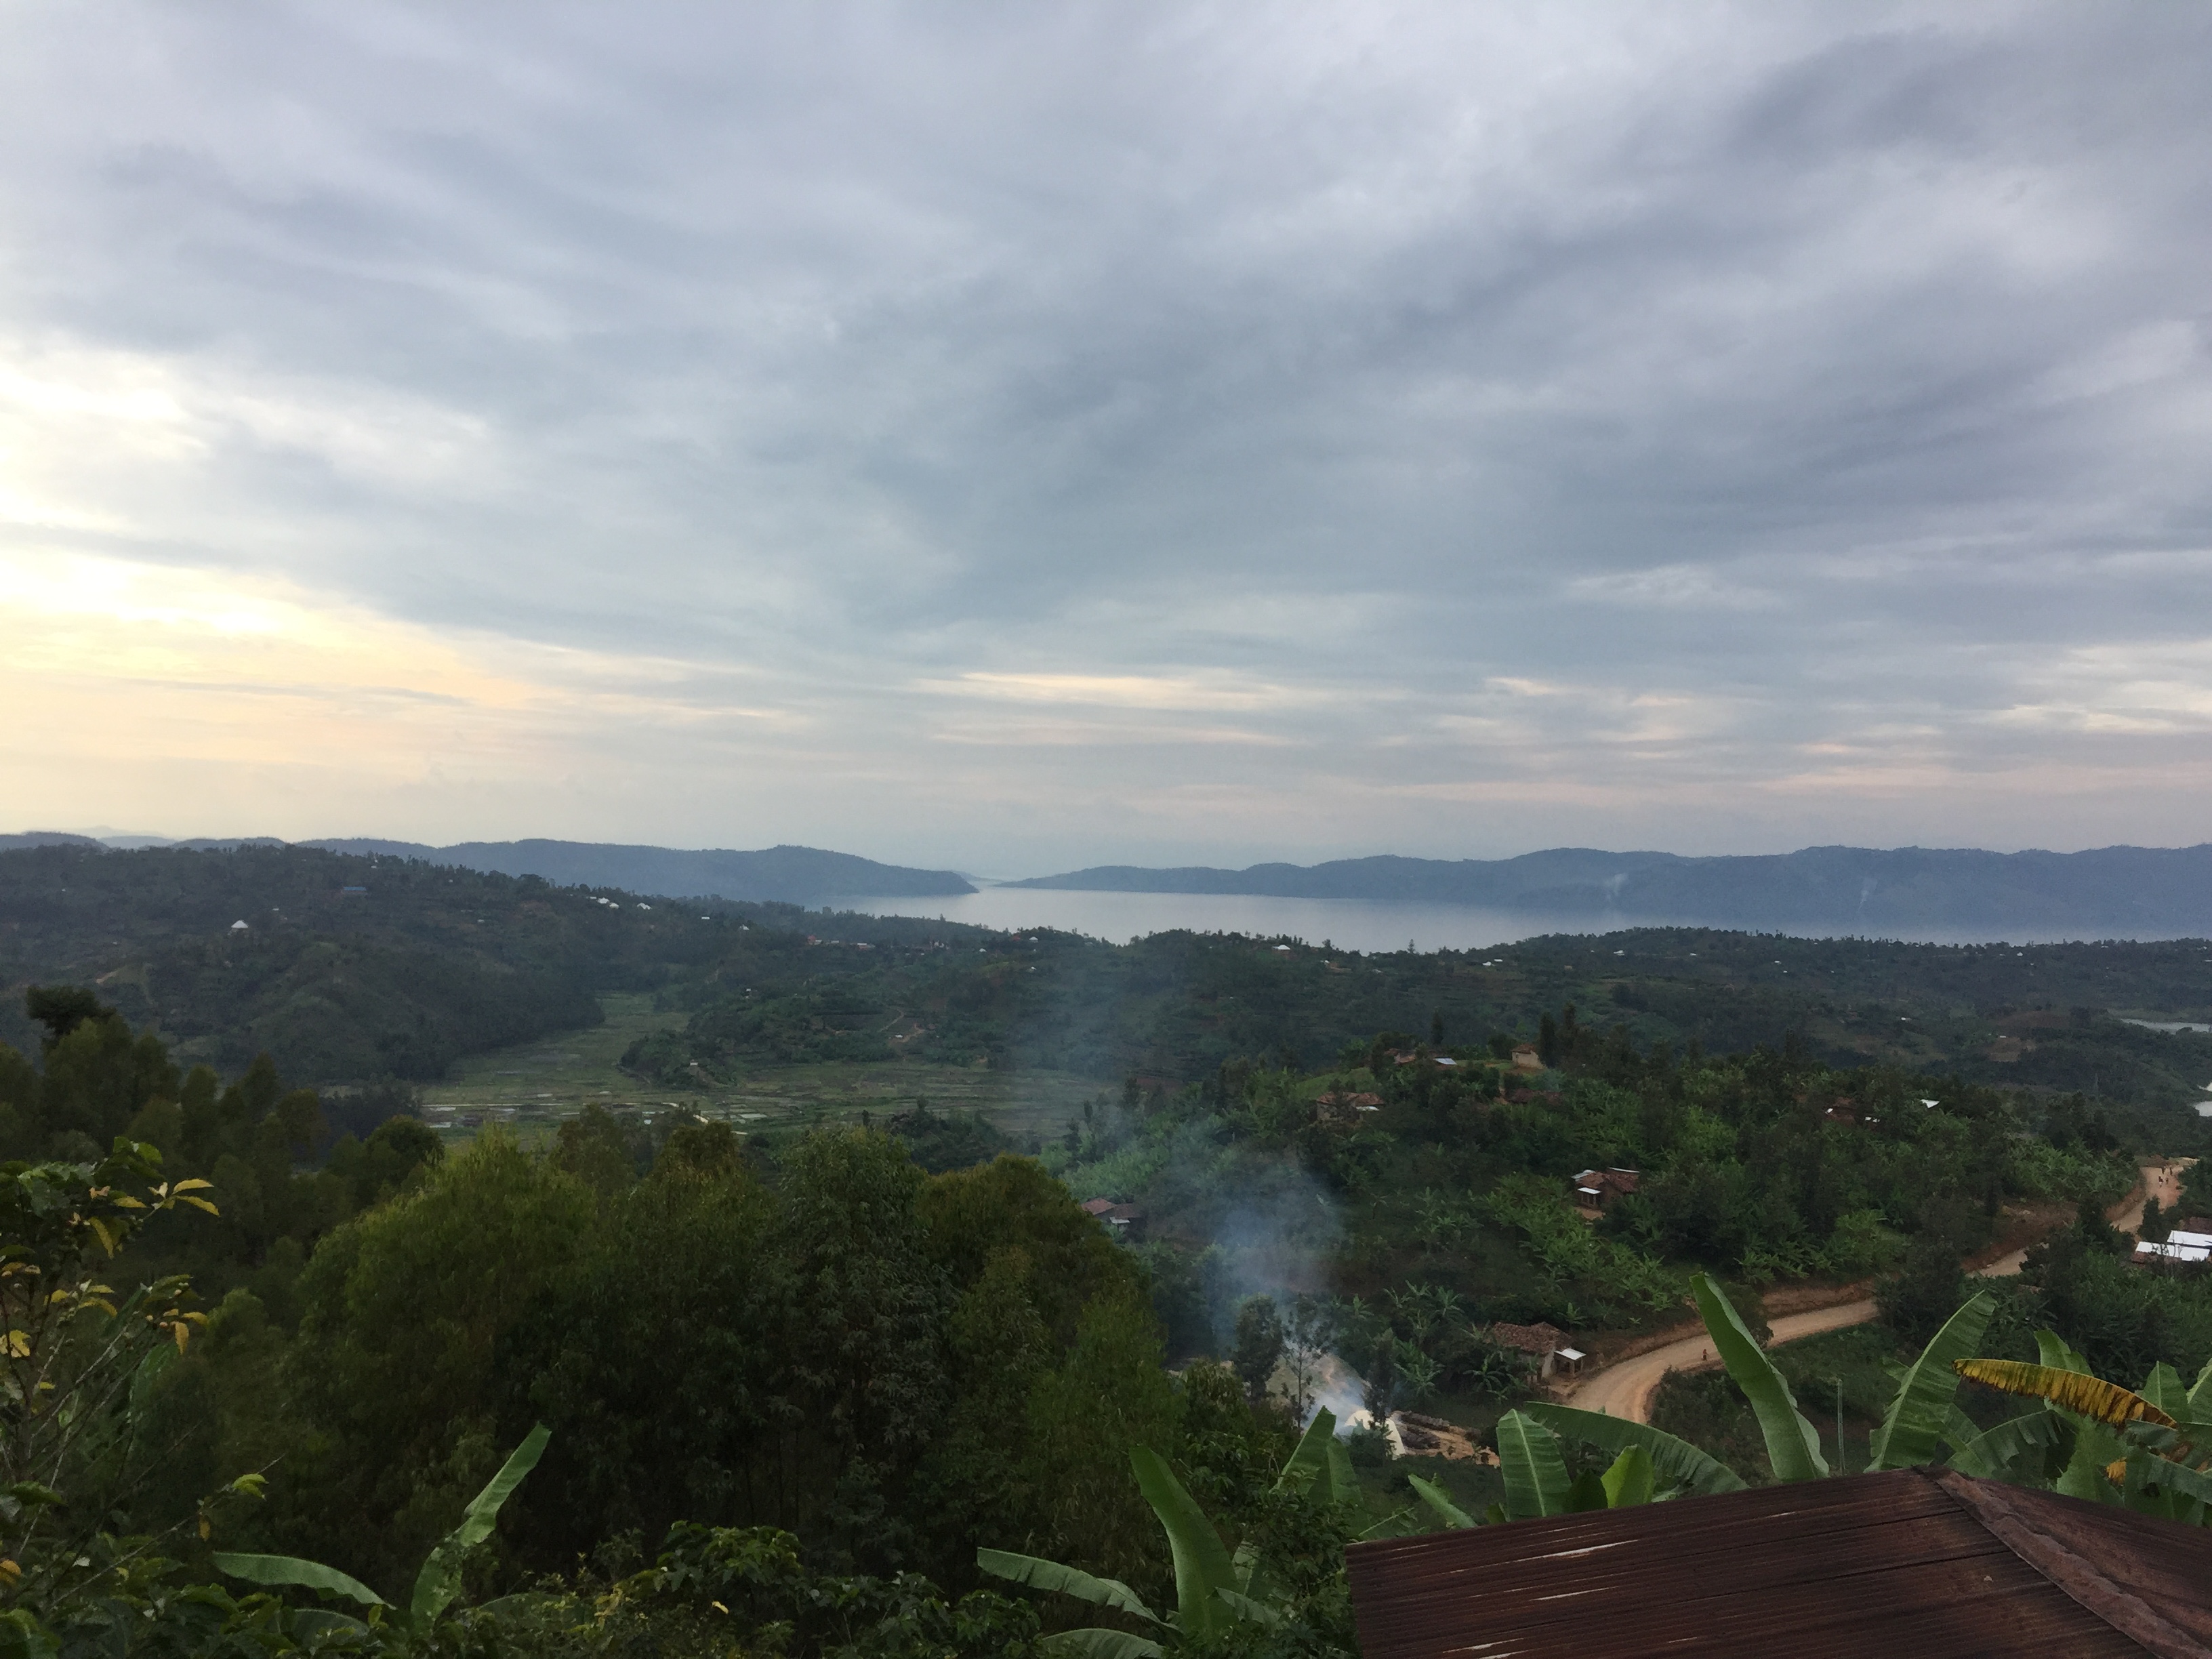 View of Lake Kivu in the distance over wooded hills